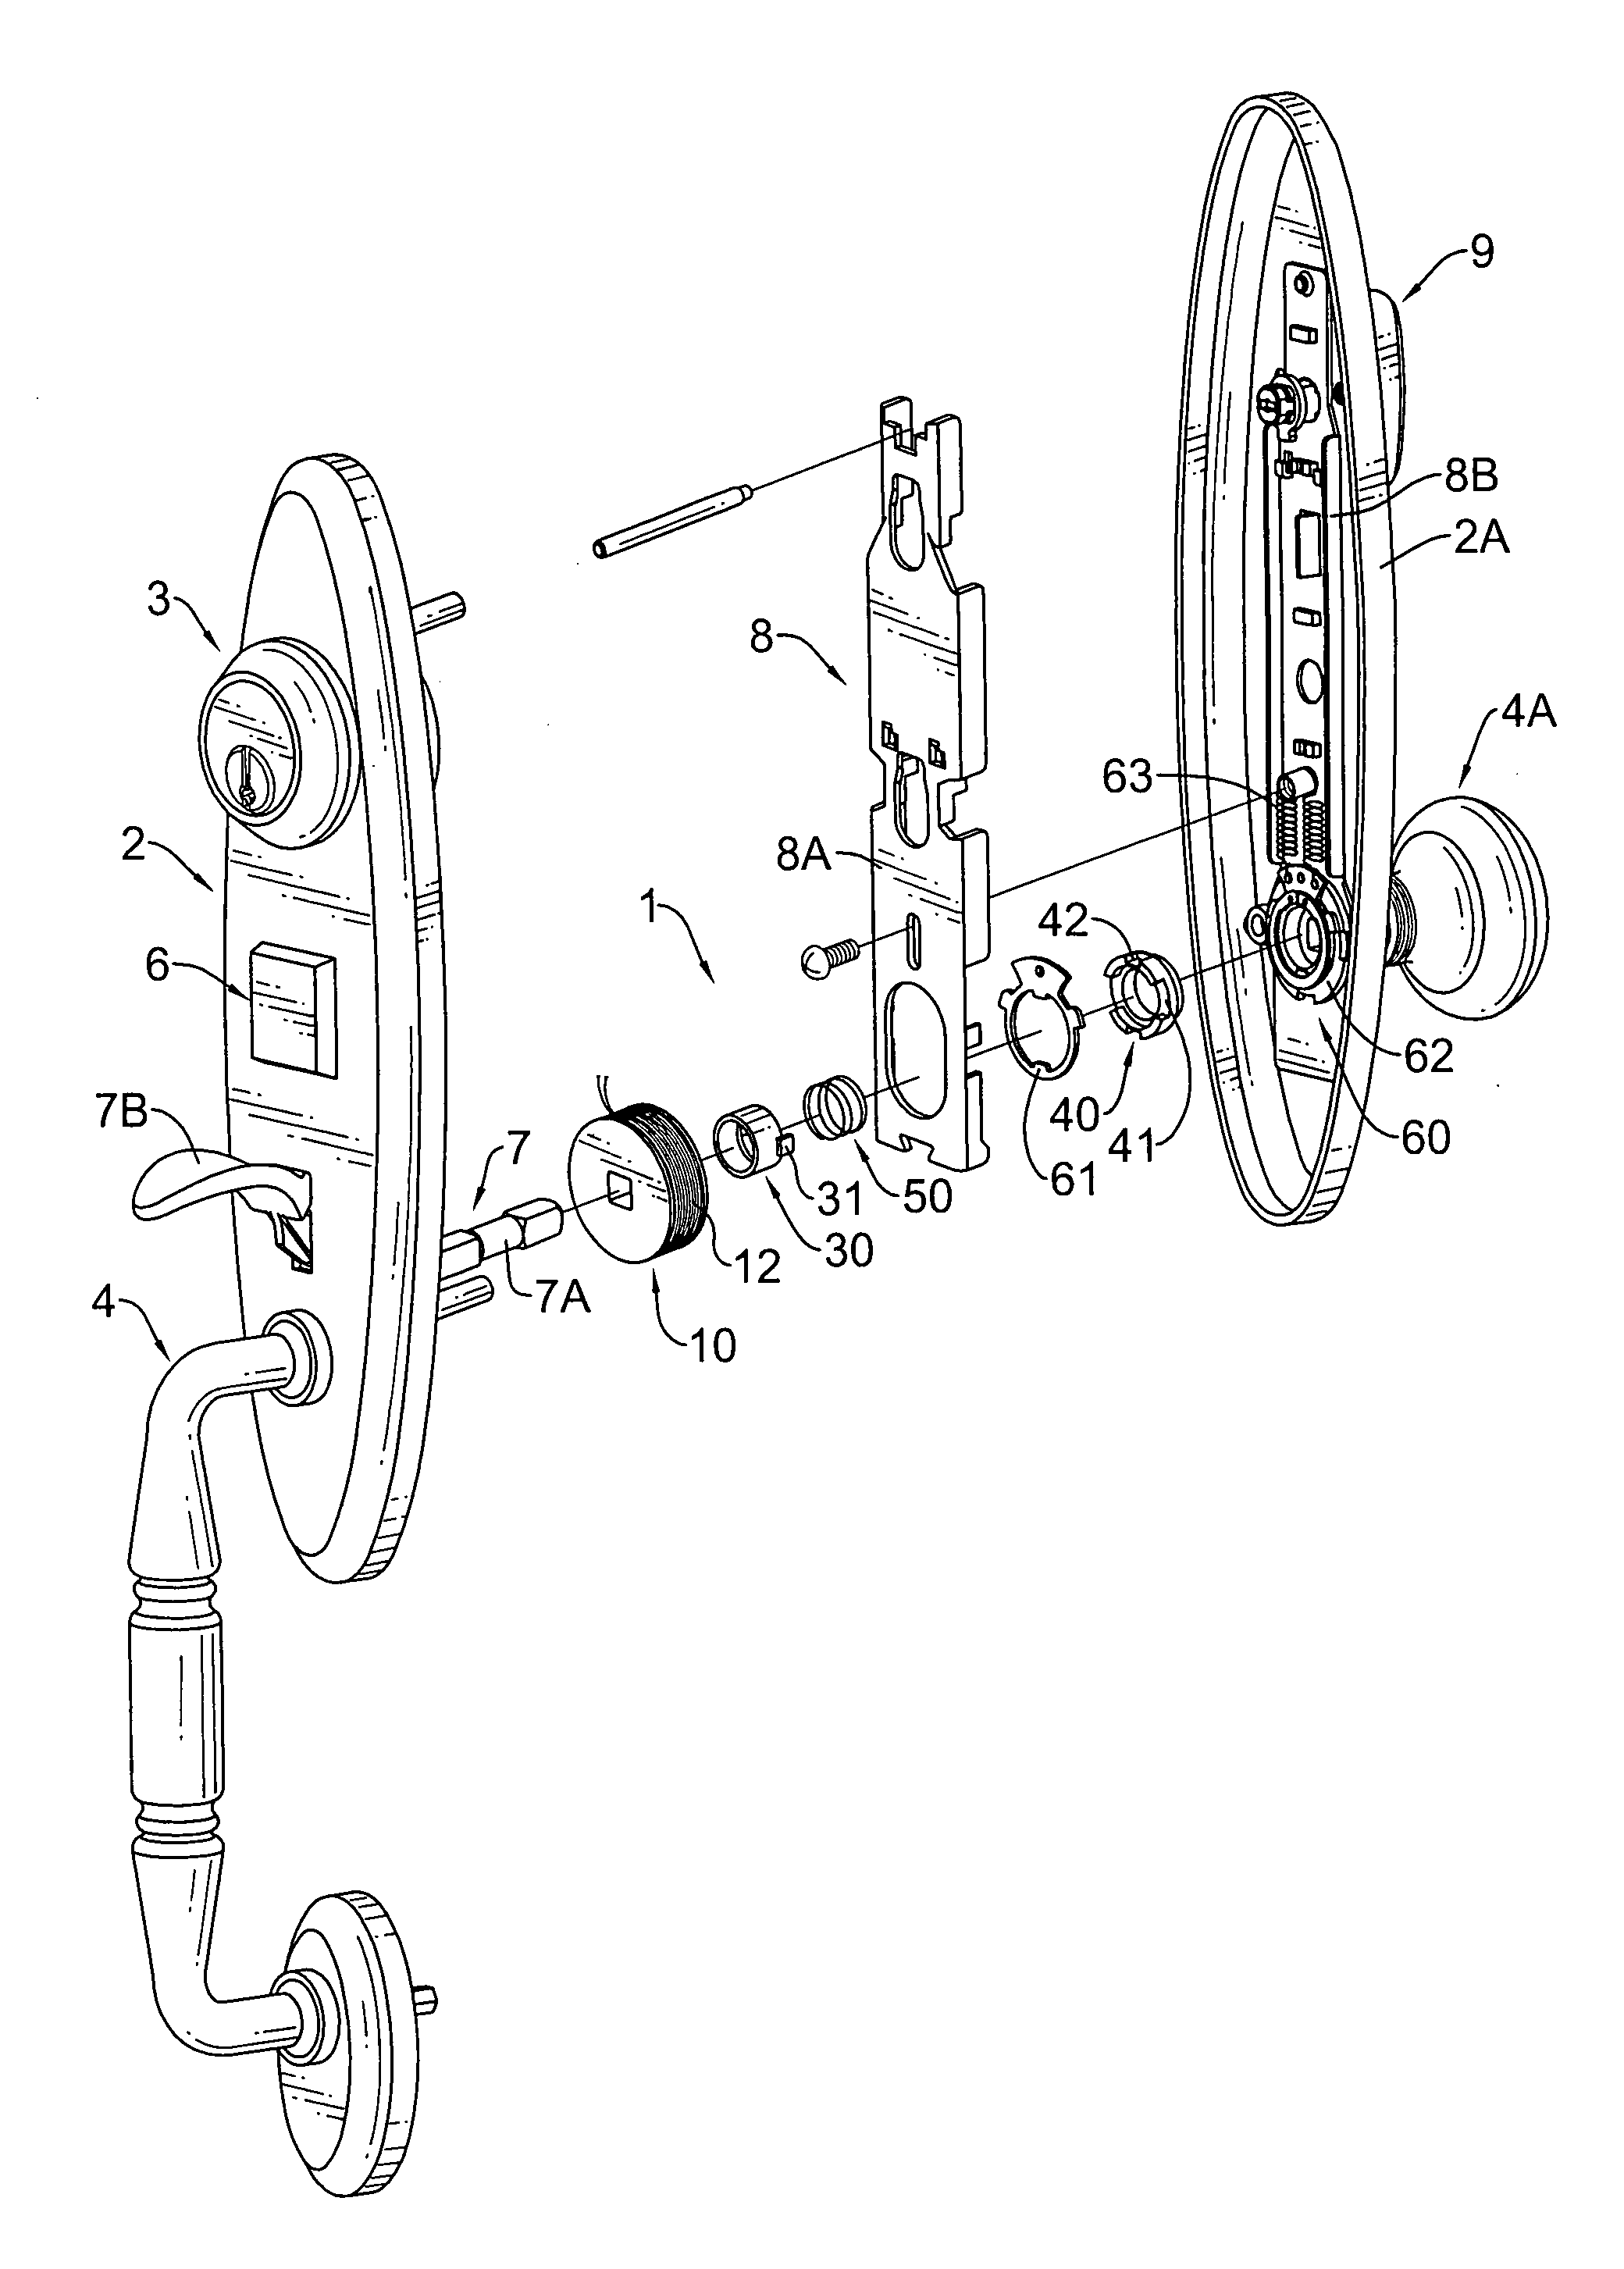 Transmission device for a door lock